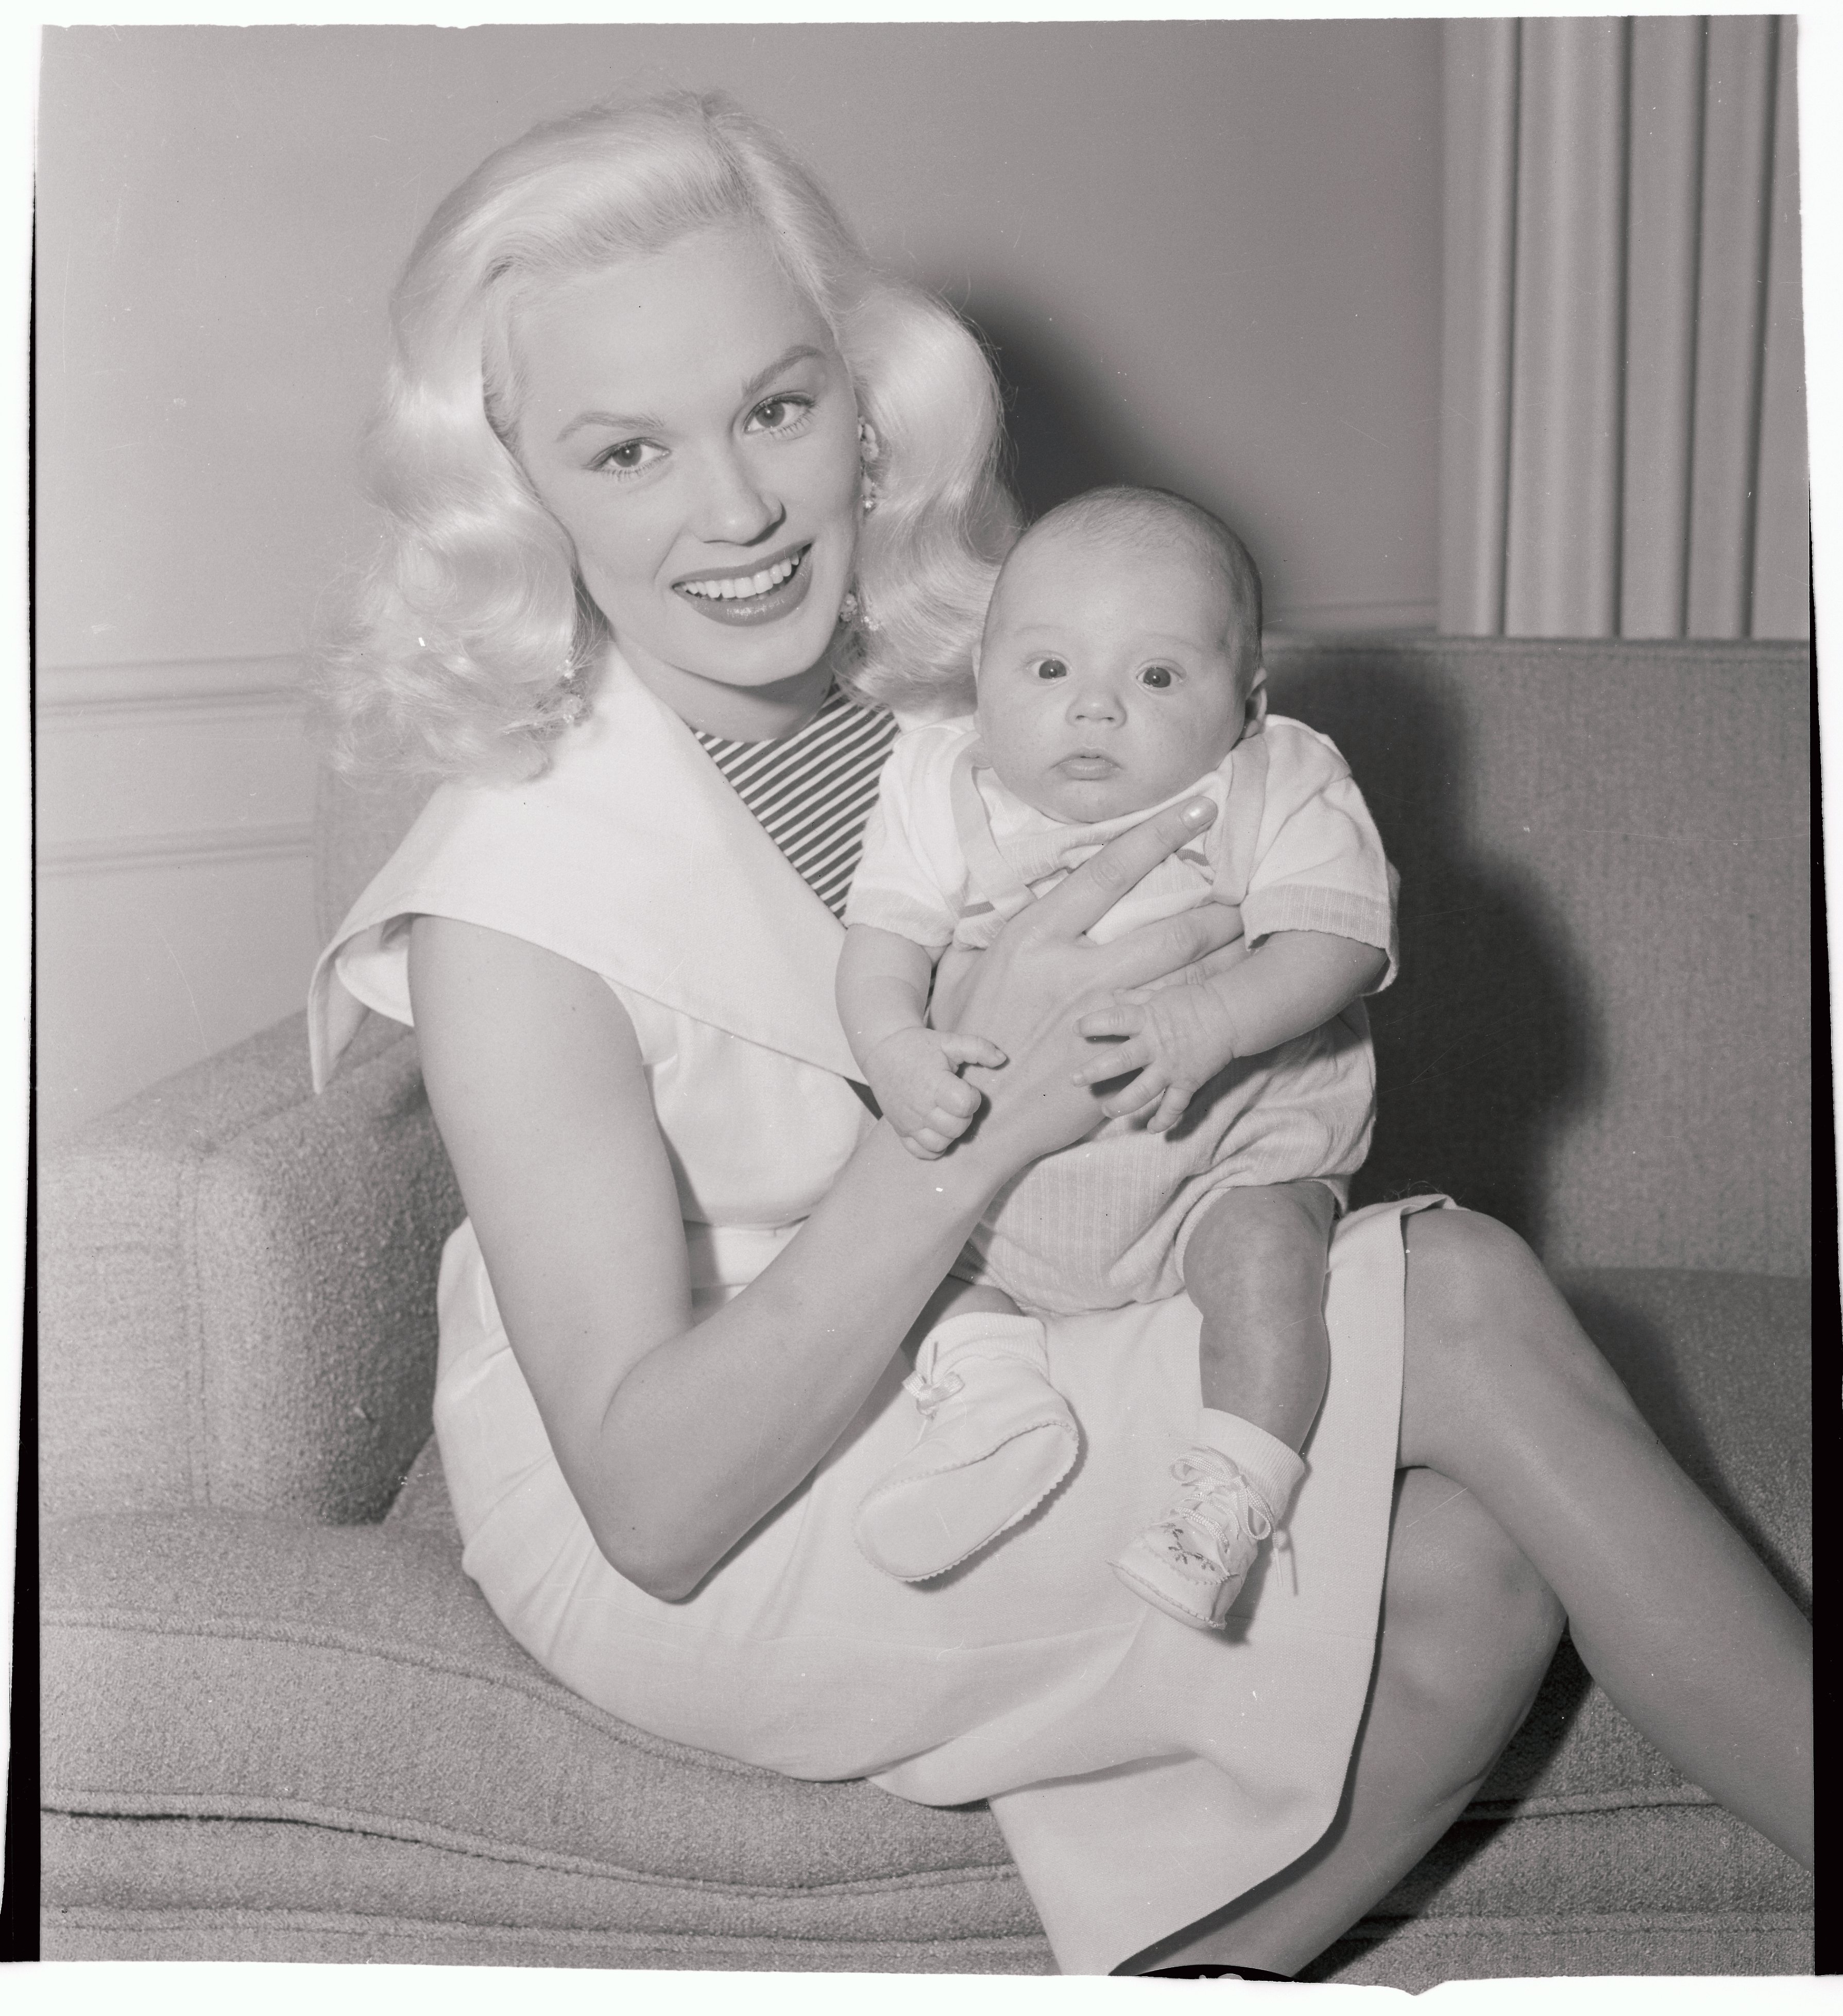 Mamie Van Doren and Perry Ray Anthony, 1956 | Source: Getty Images